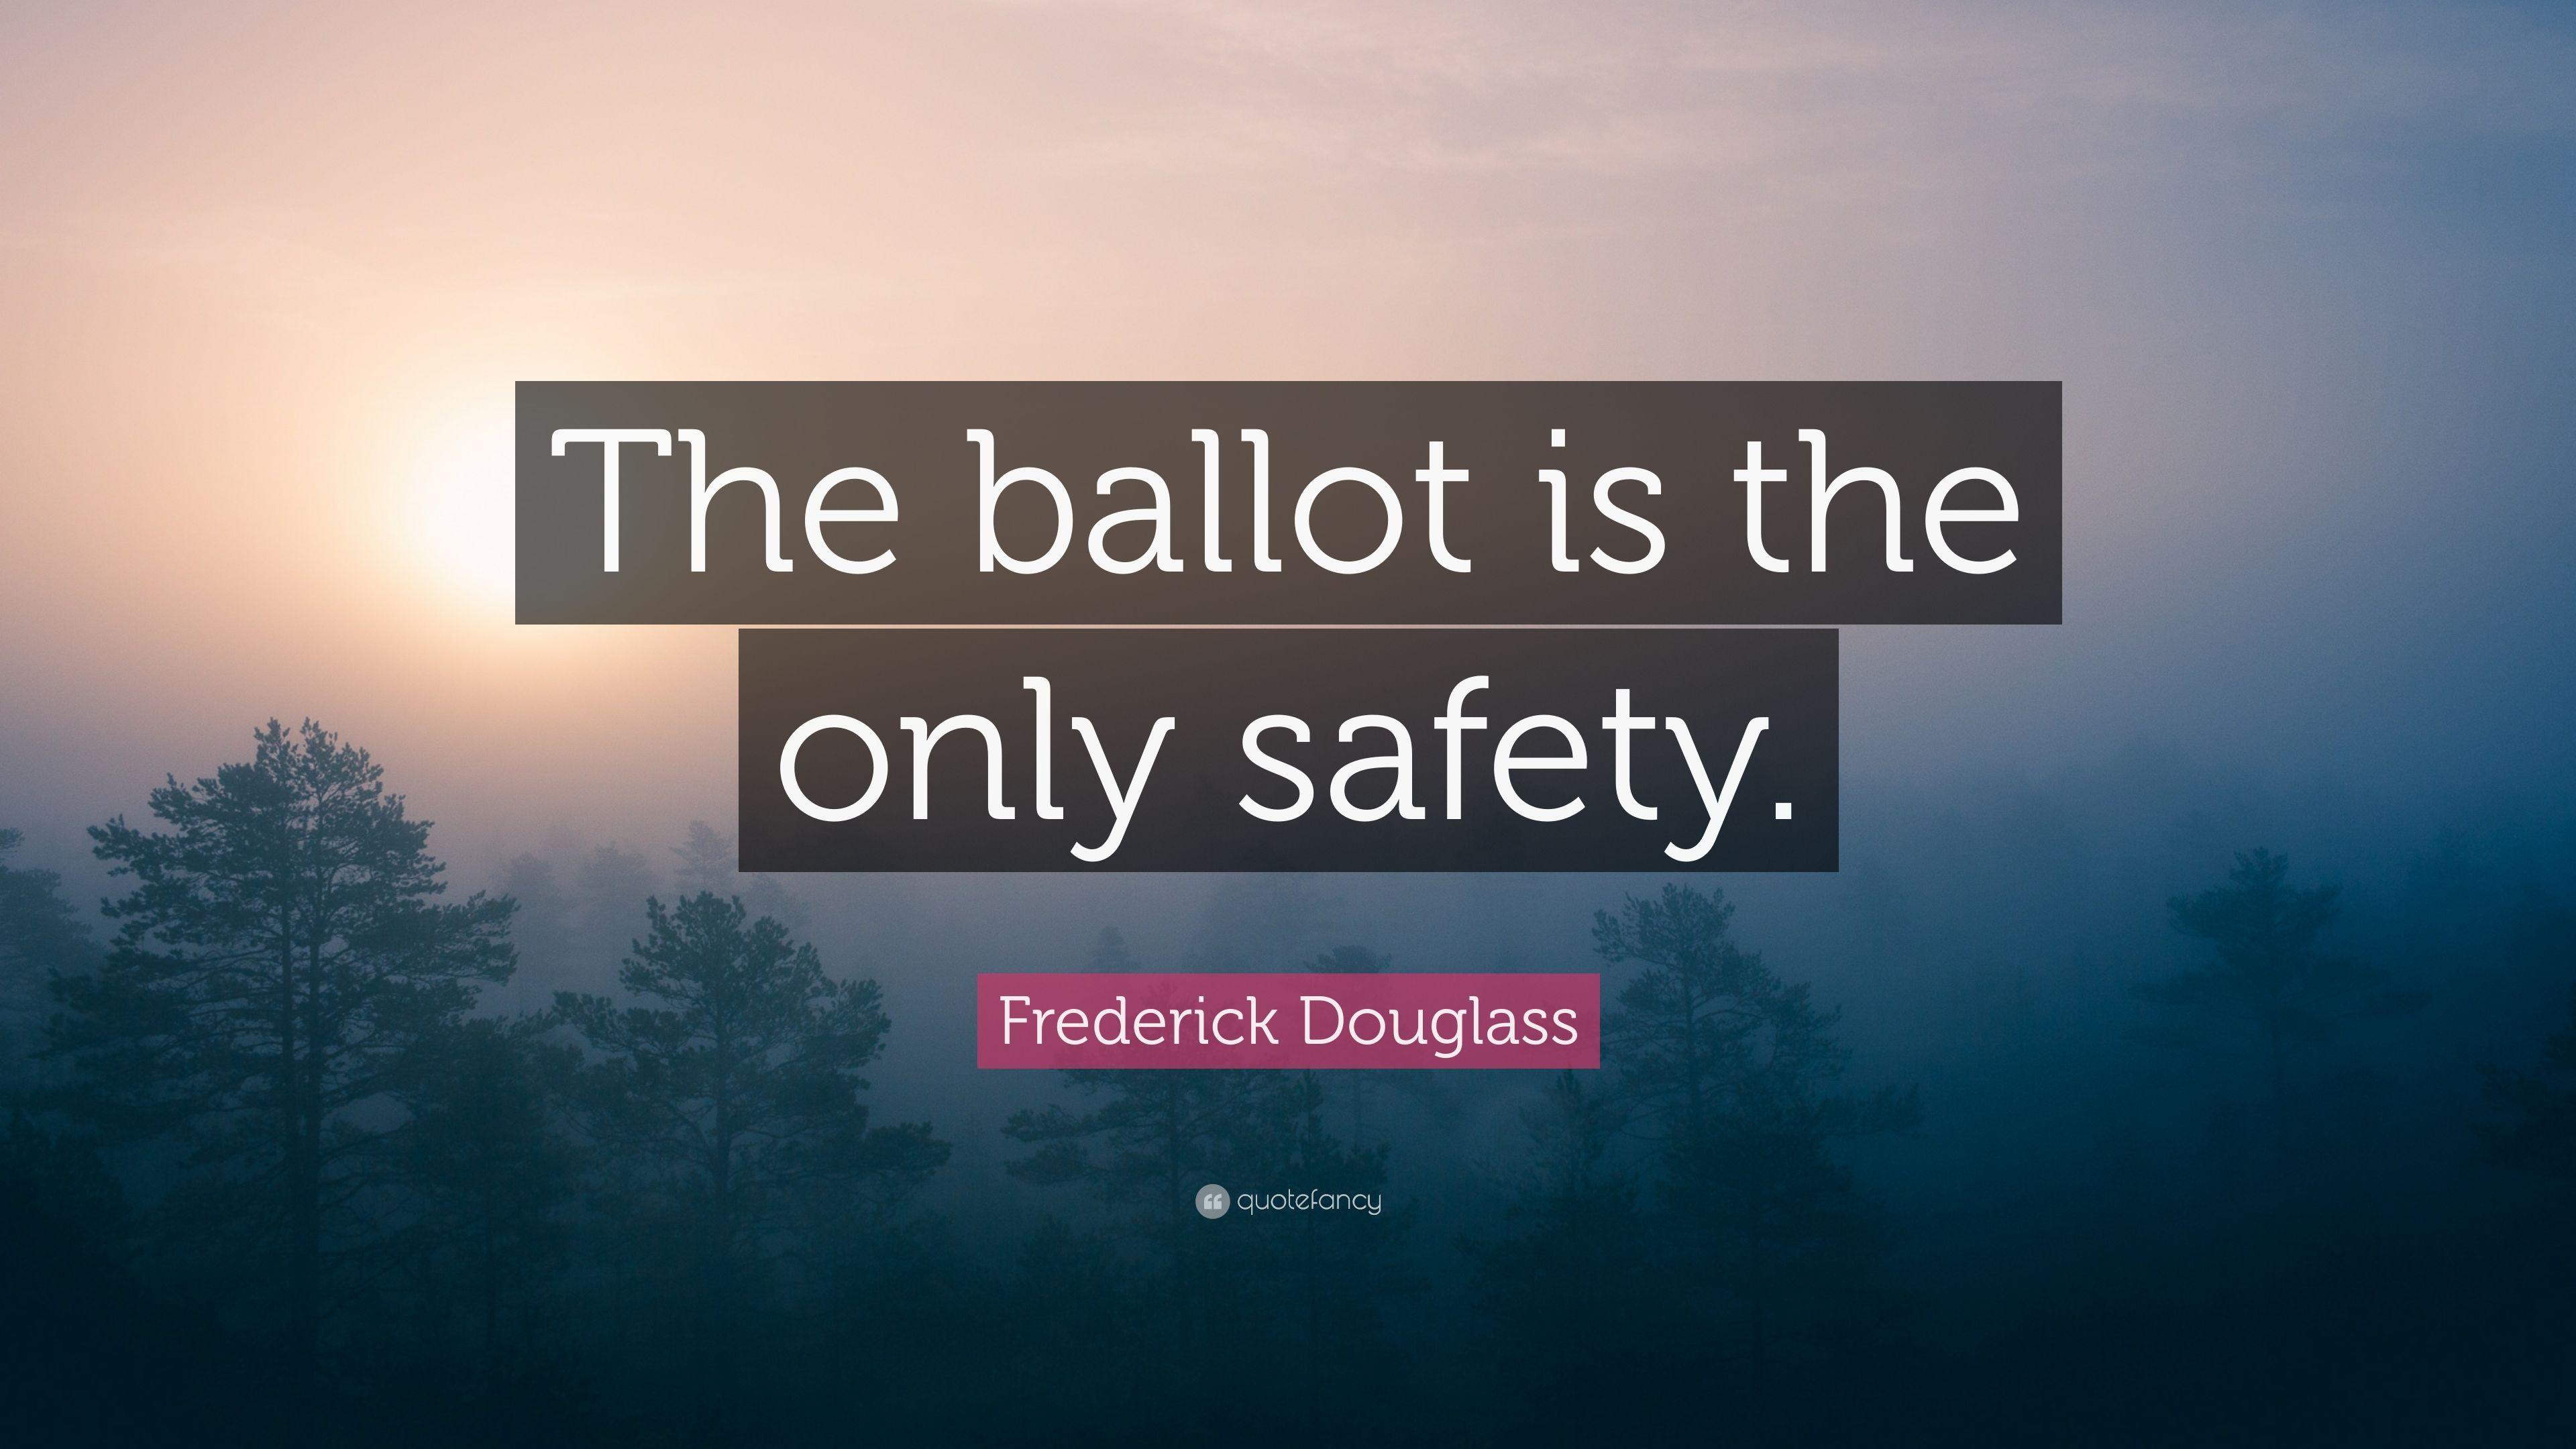 Frederick Douglass Quote: “The ballot is the only safety.” 10